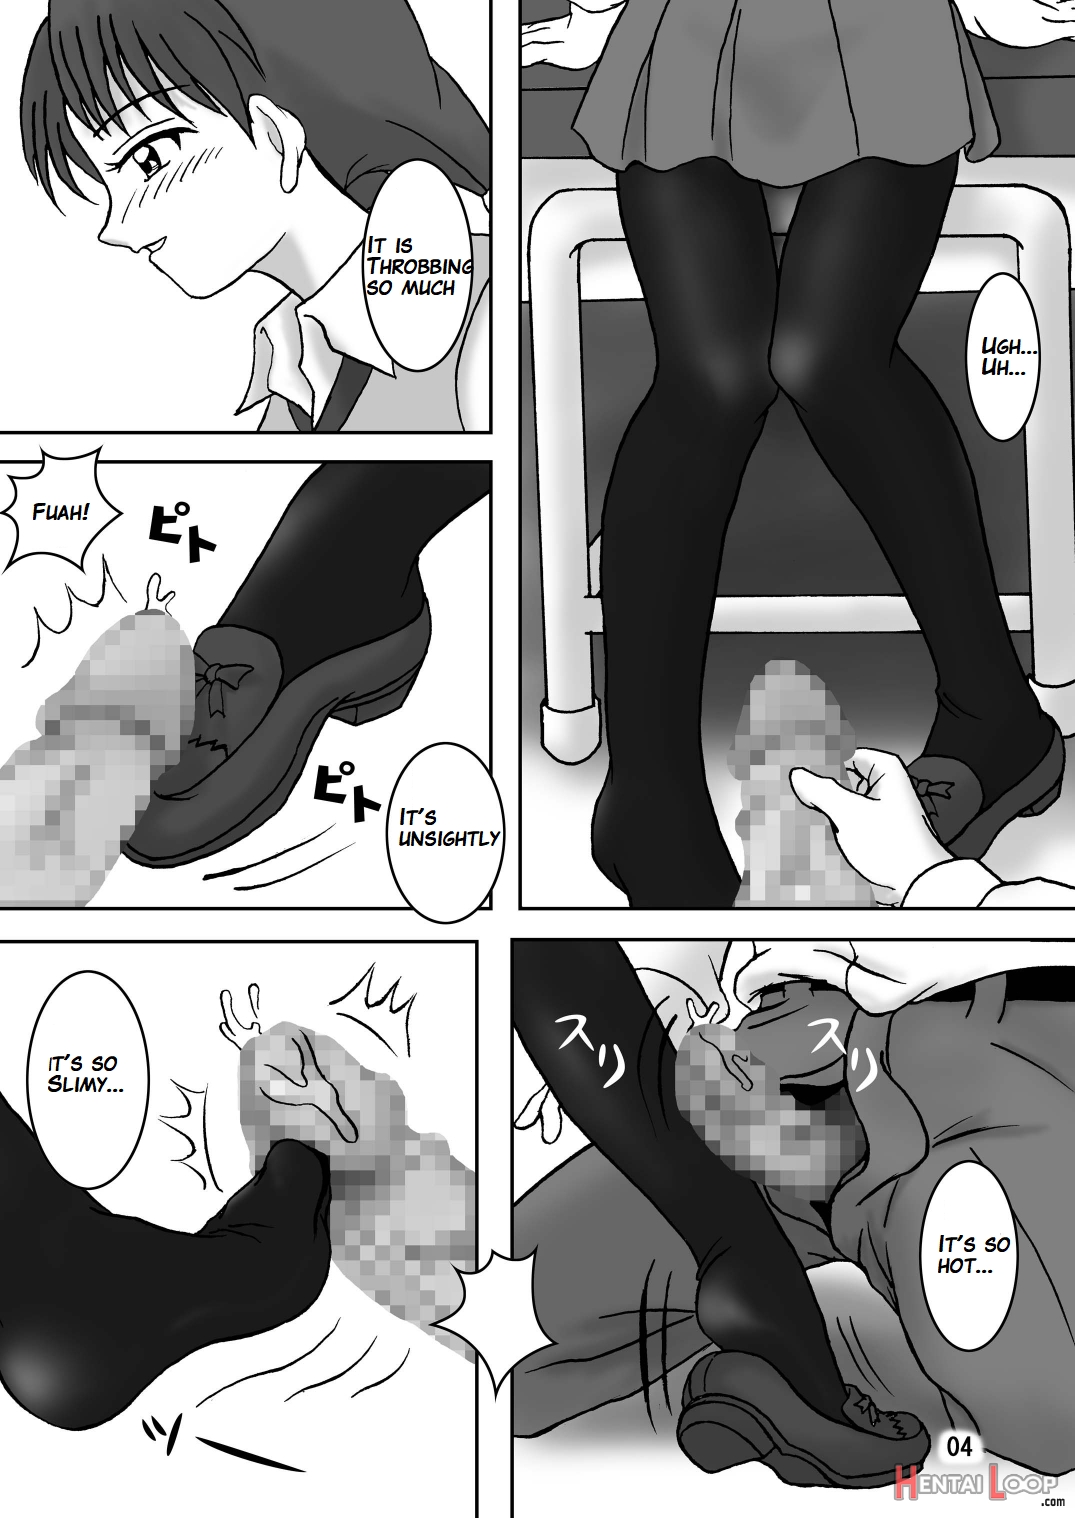 Tights, Please 2 page 5